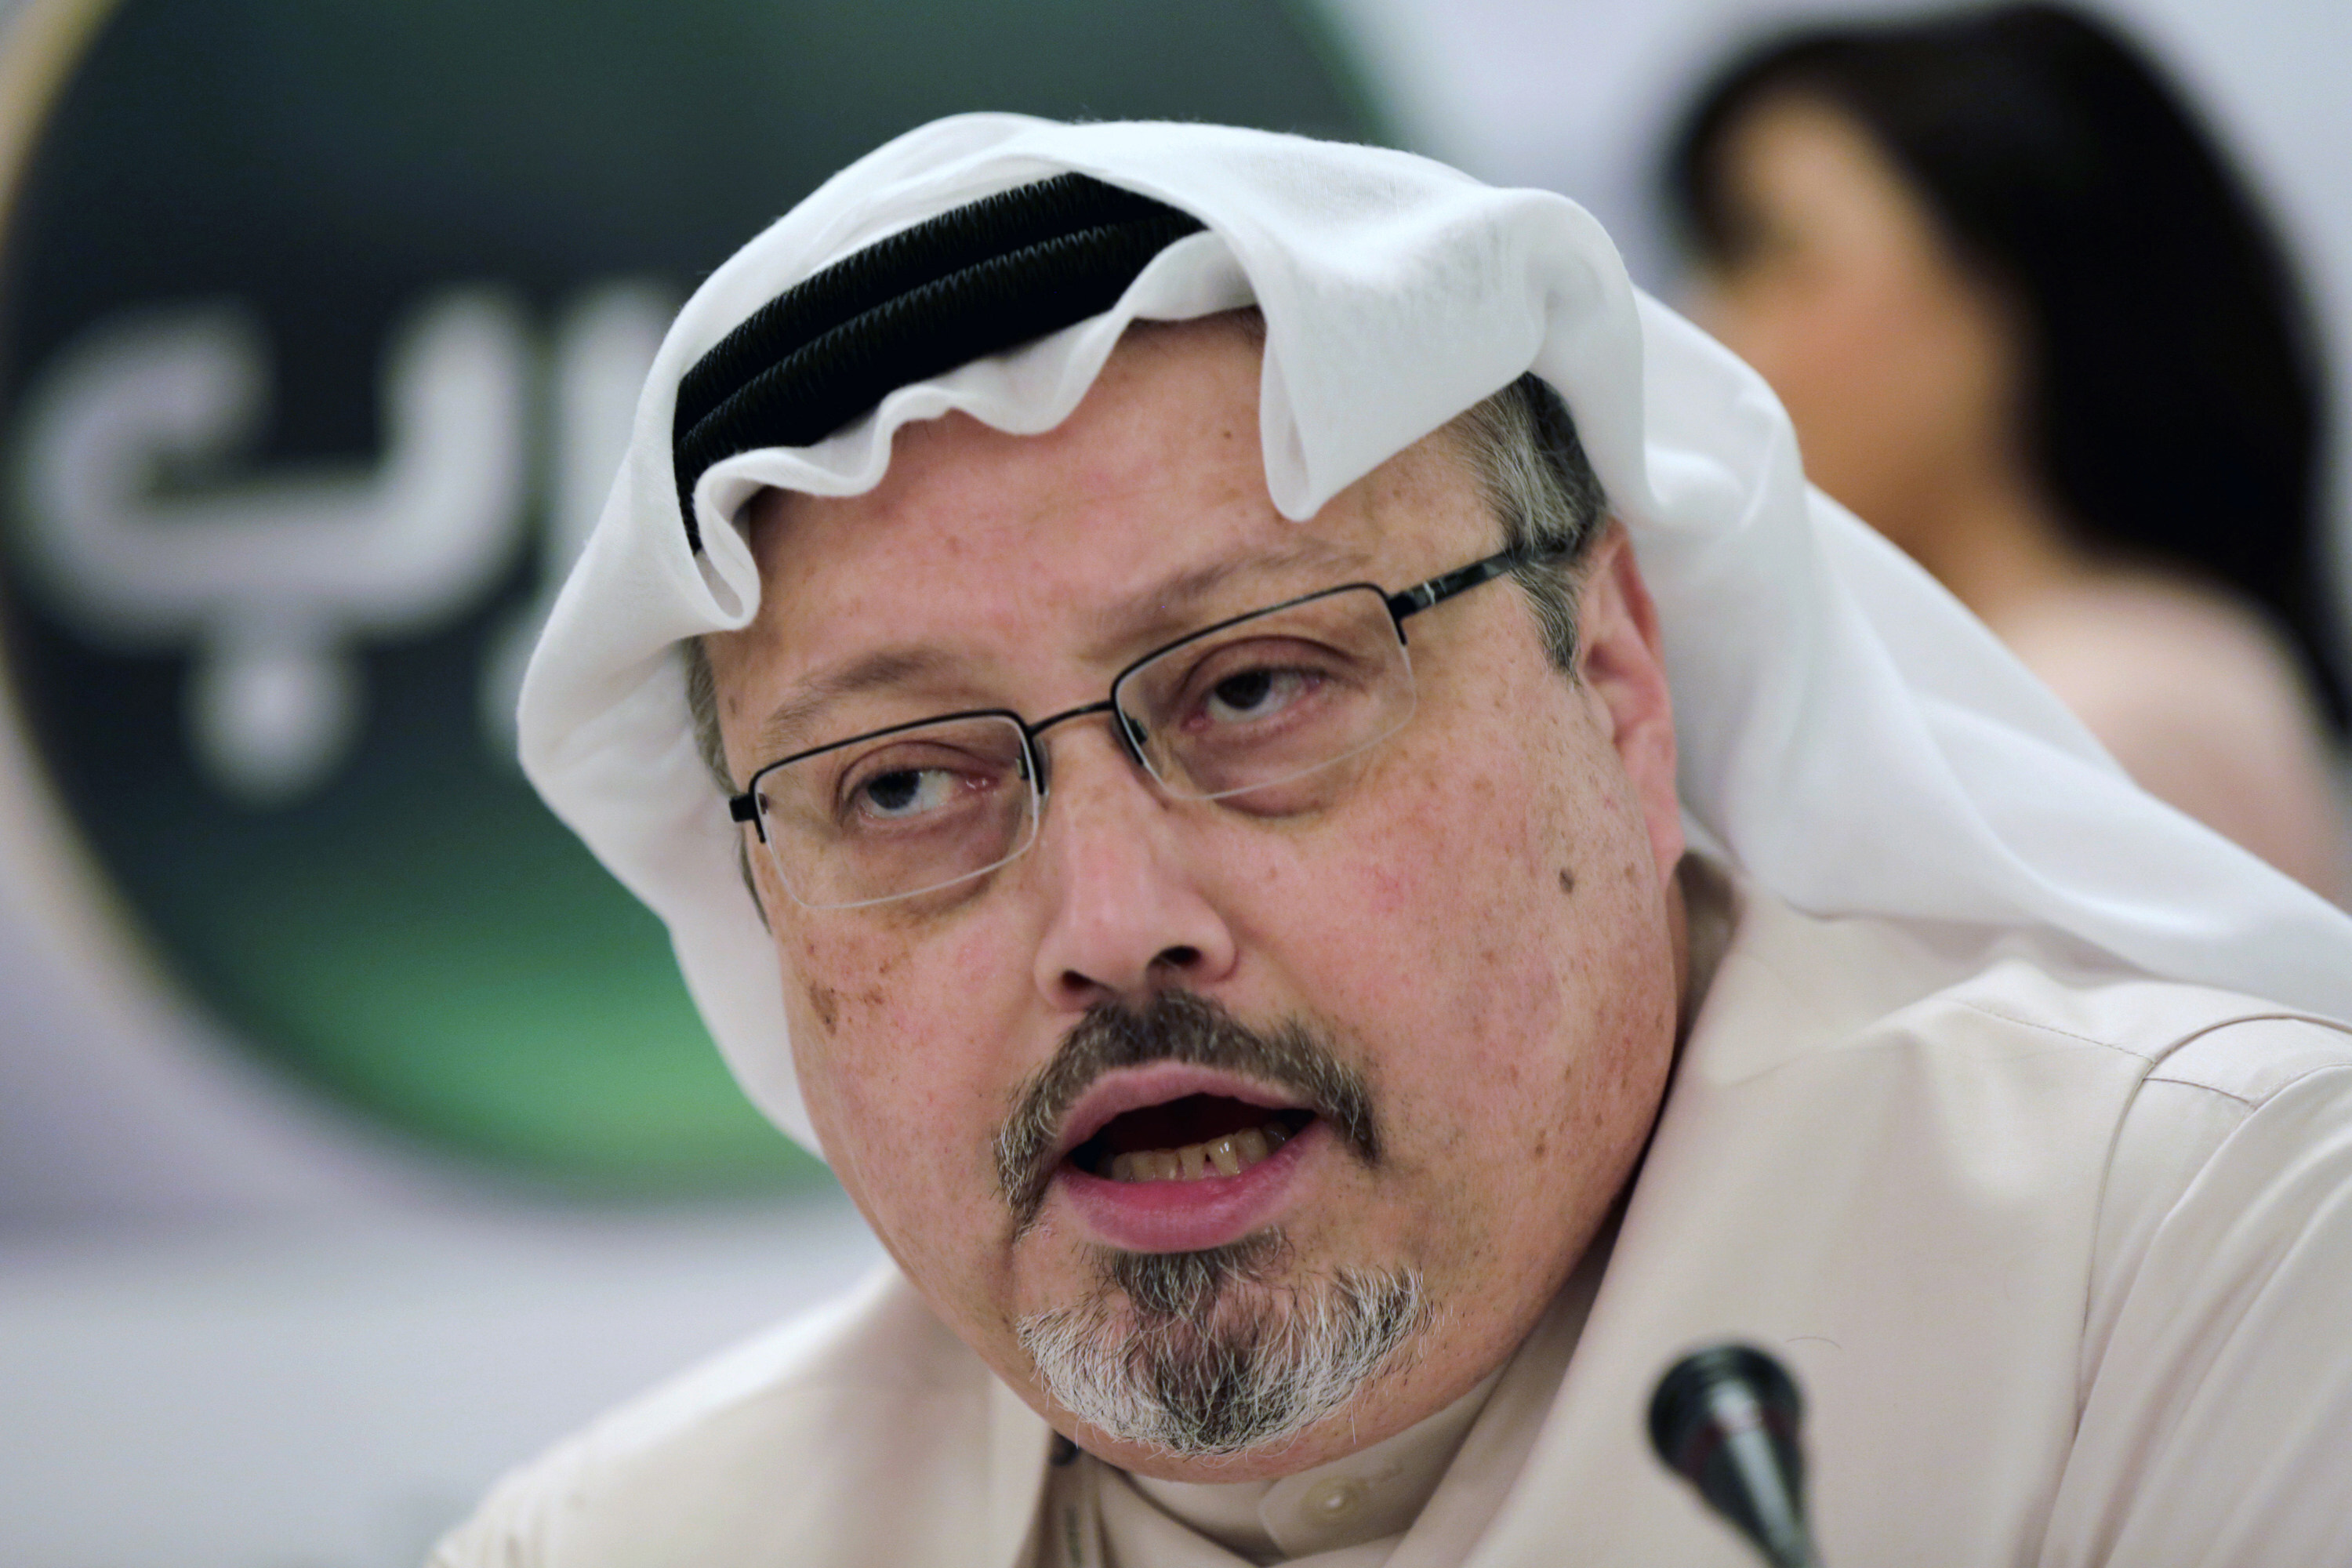 Saudi journalist Jamal Khashoggi speaks during a press conference in Bahrain in December 2014. A Turkish court halted the trial of Saudi suspects over his killing and transfered it to Saudi Arabia. Photo: AP